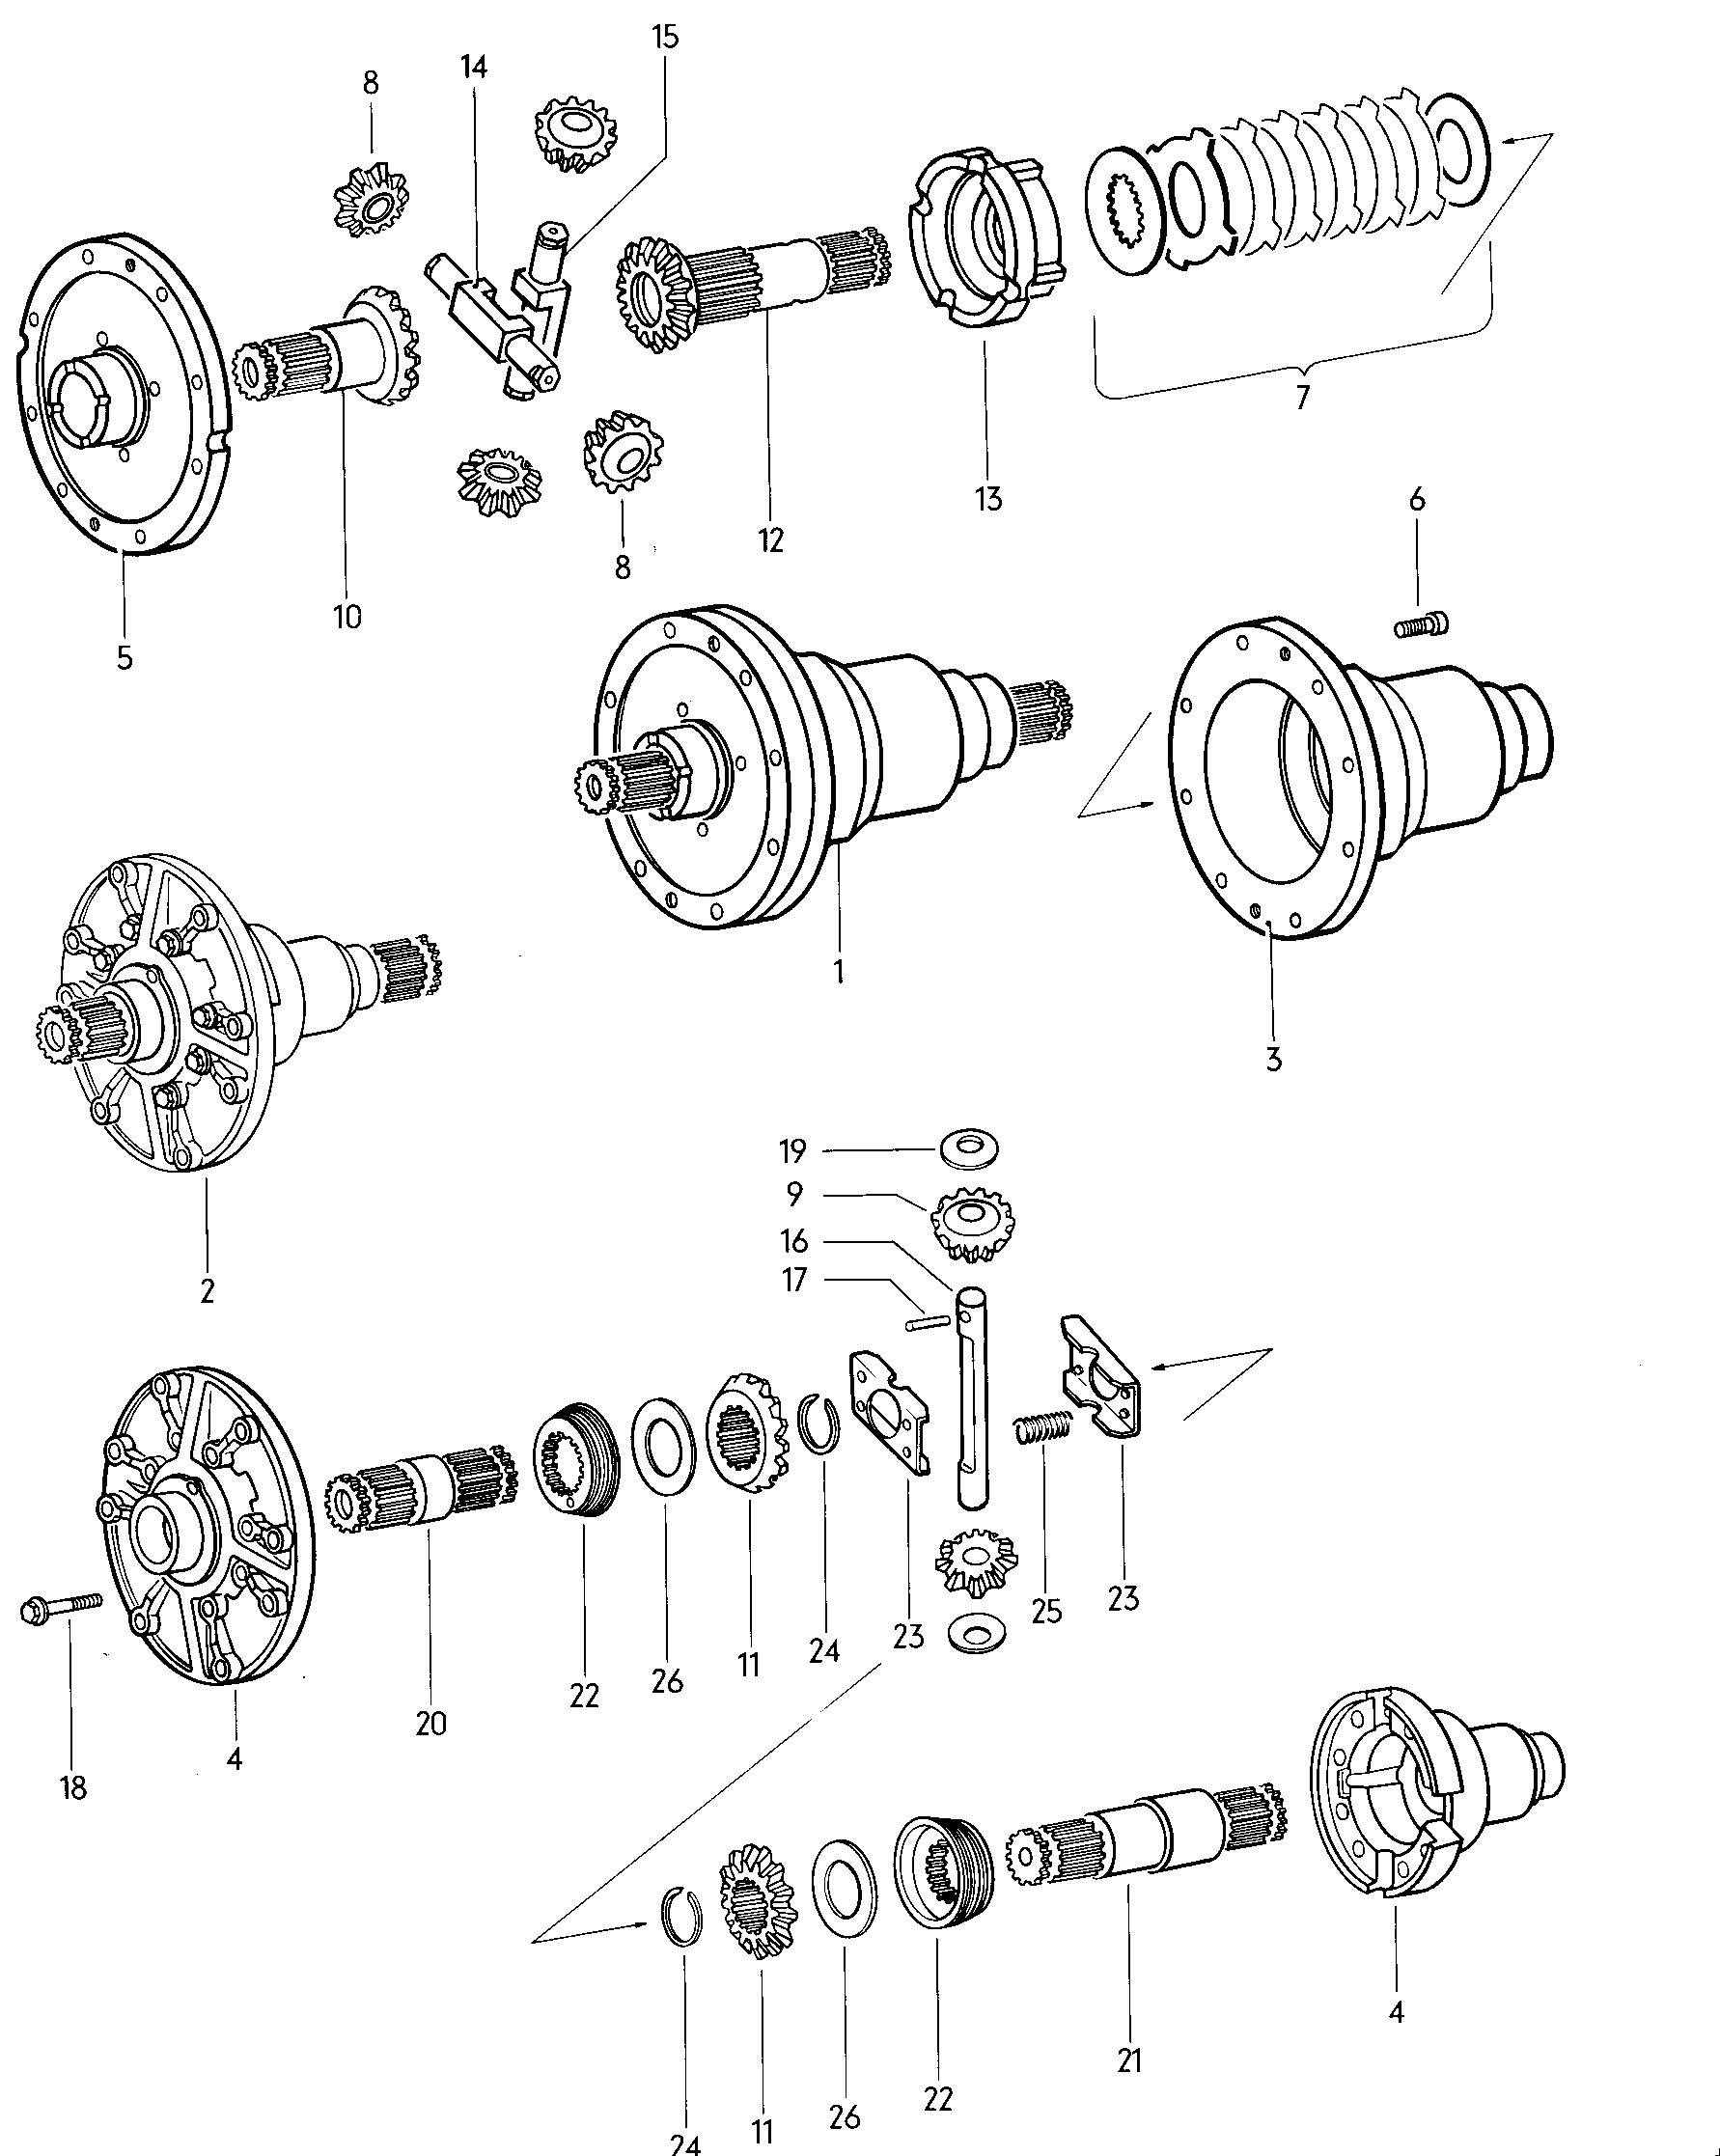 Sperrdifferential<br> F 218  000 001>> 212 2300 000  - Typ 2/syncro - t2